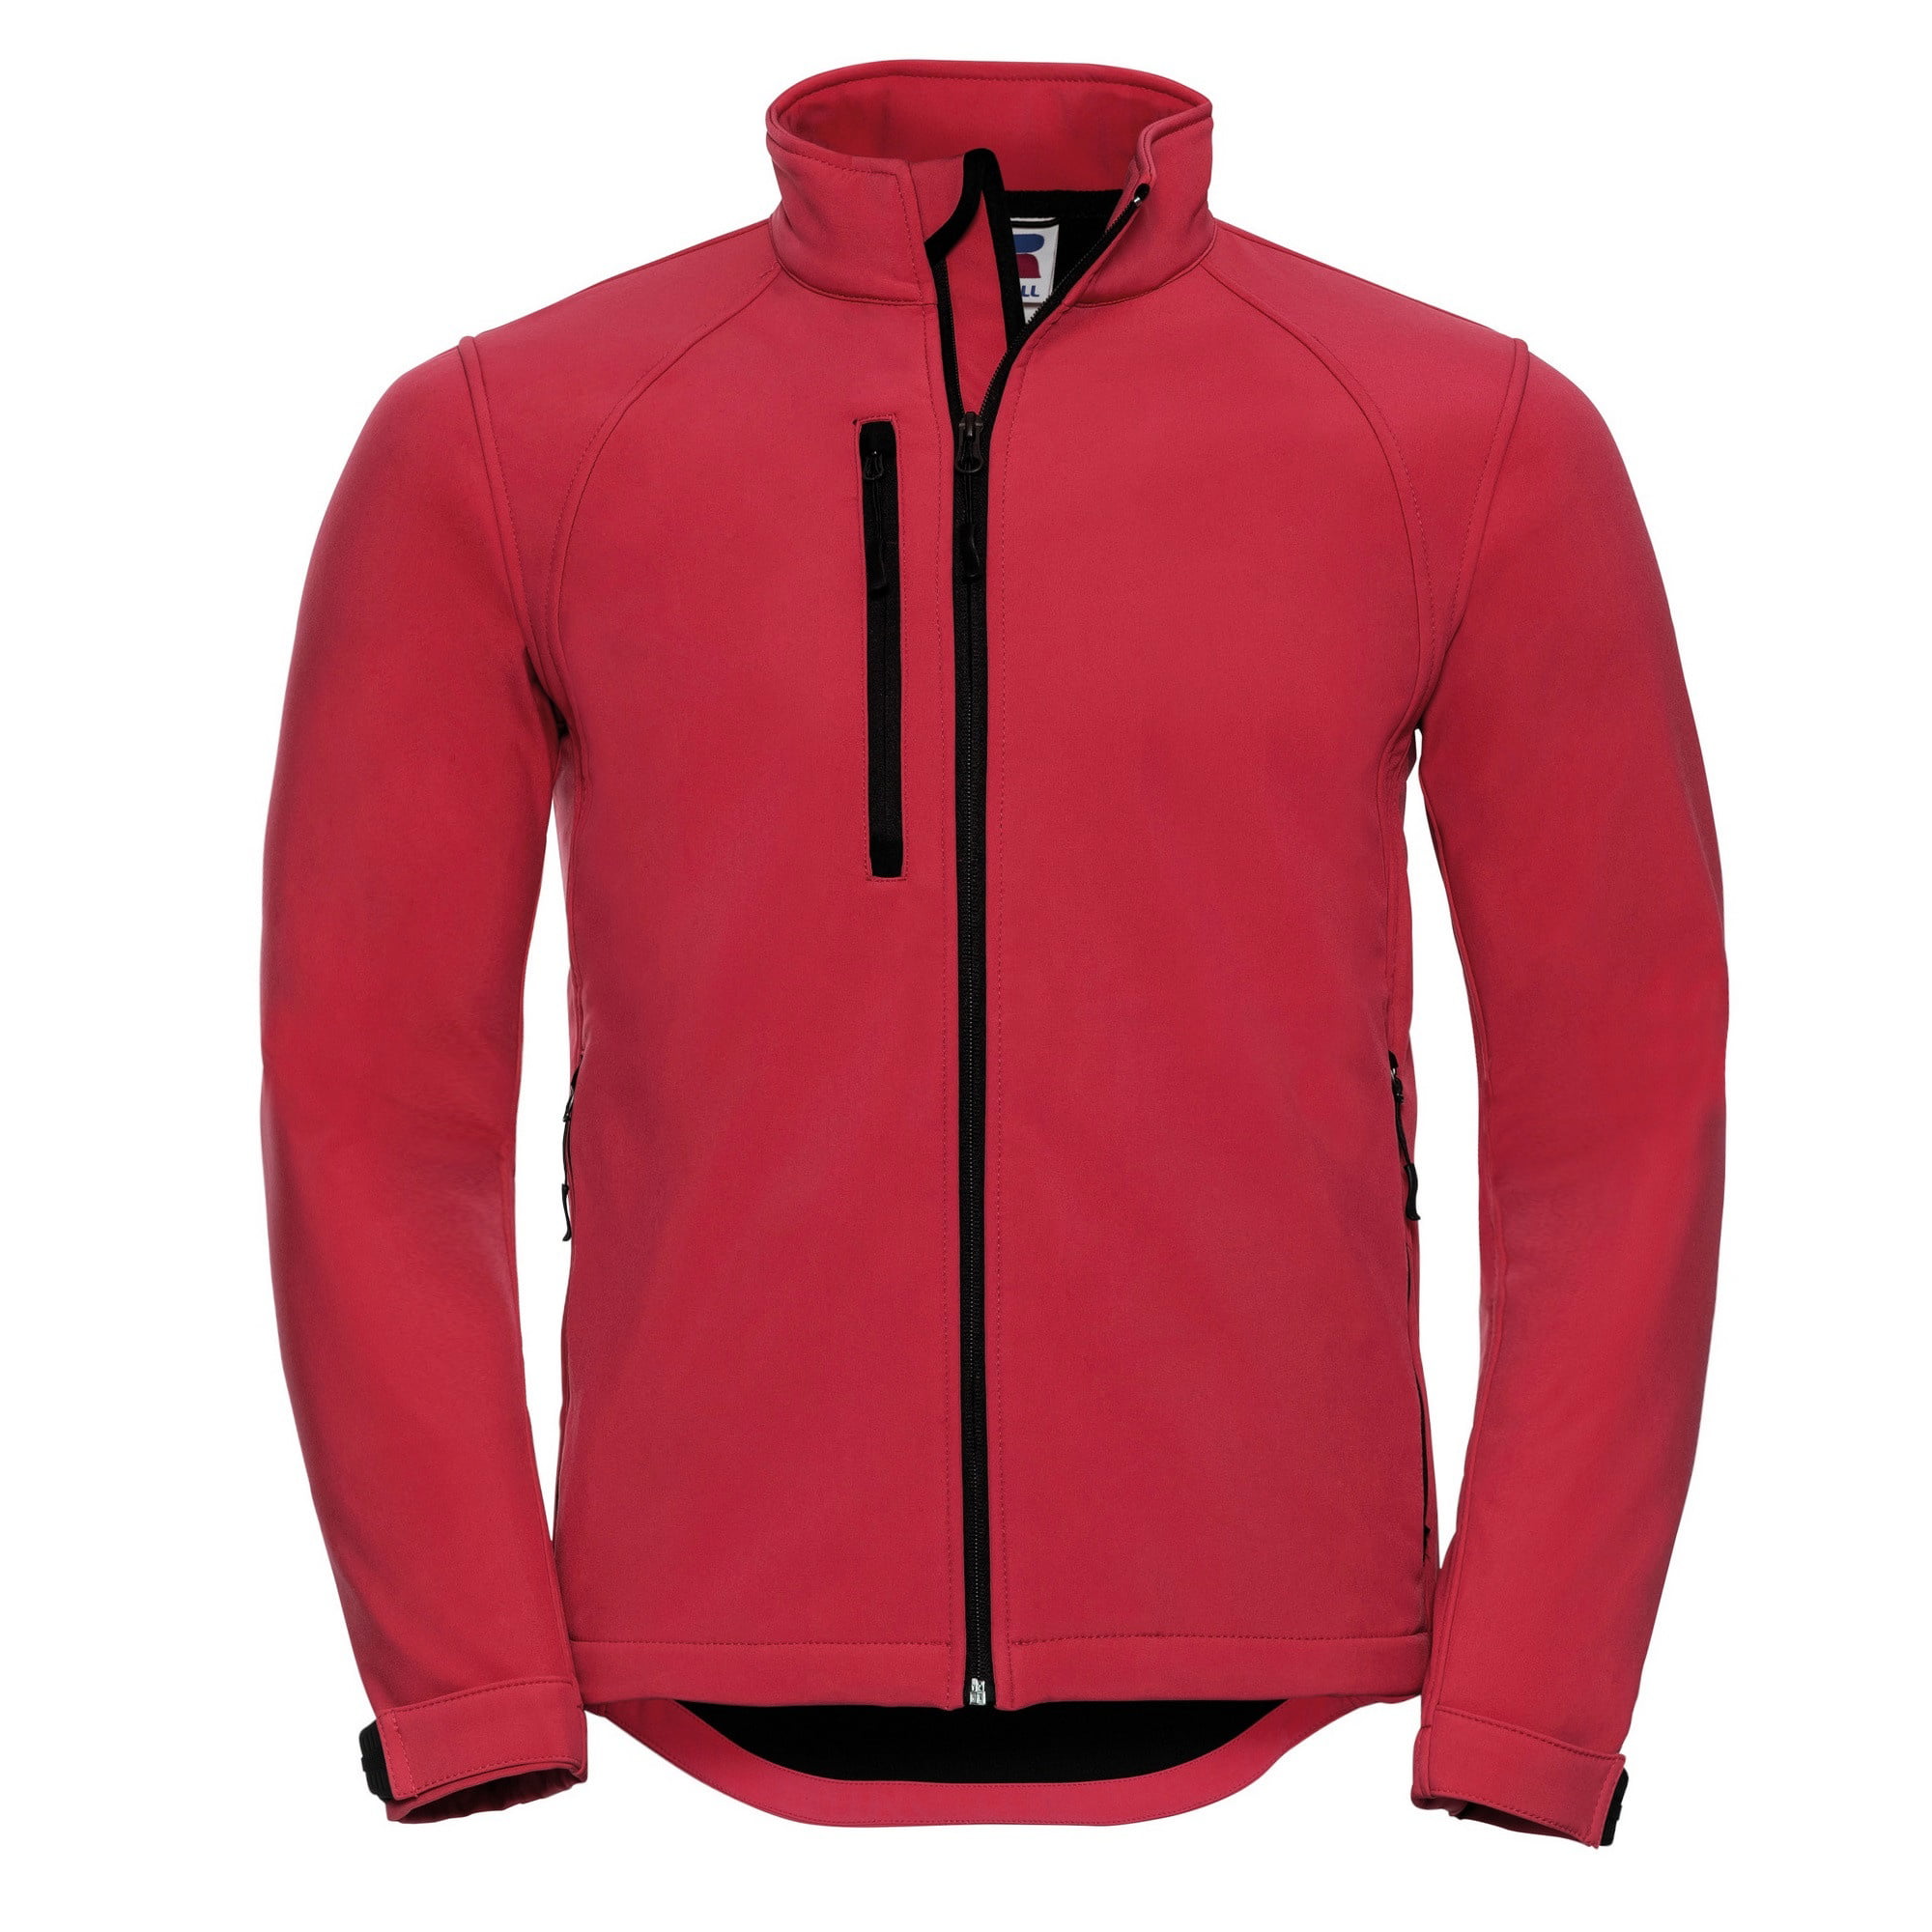 Mens Russell Soft Shell Jacket Breathable windproof and water resistant 5000mm. 